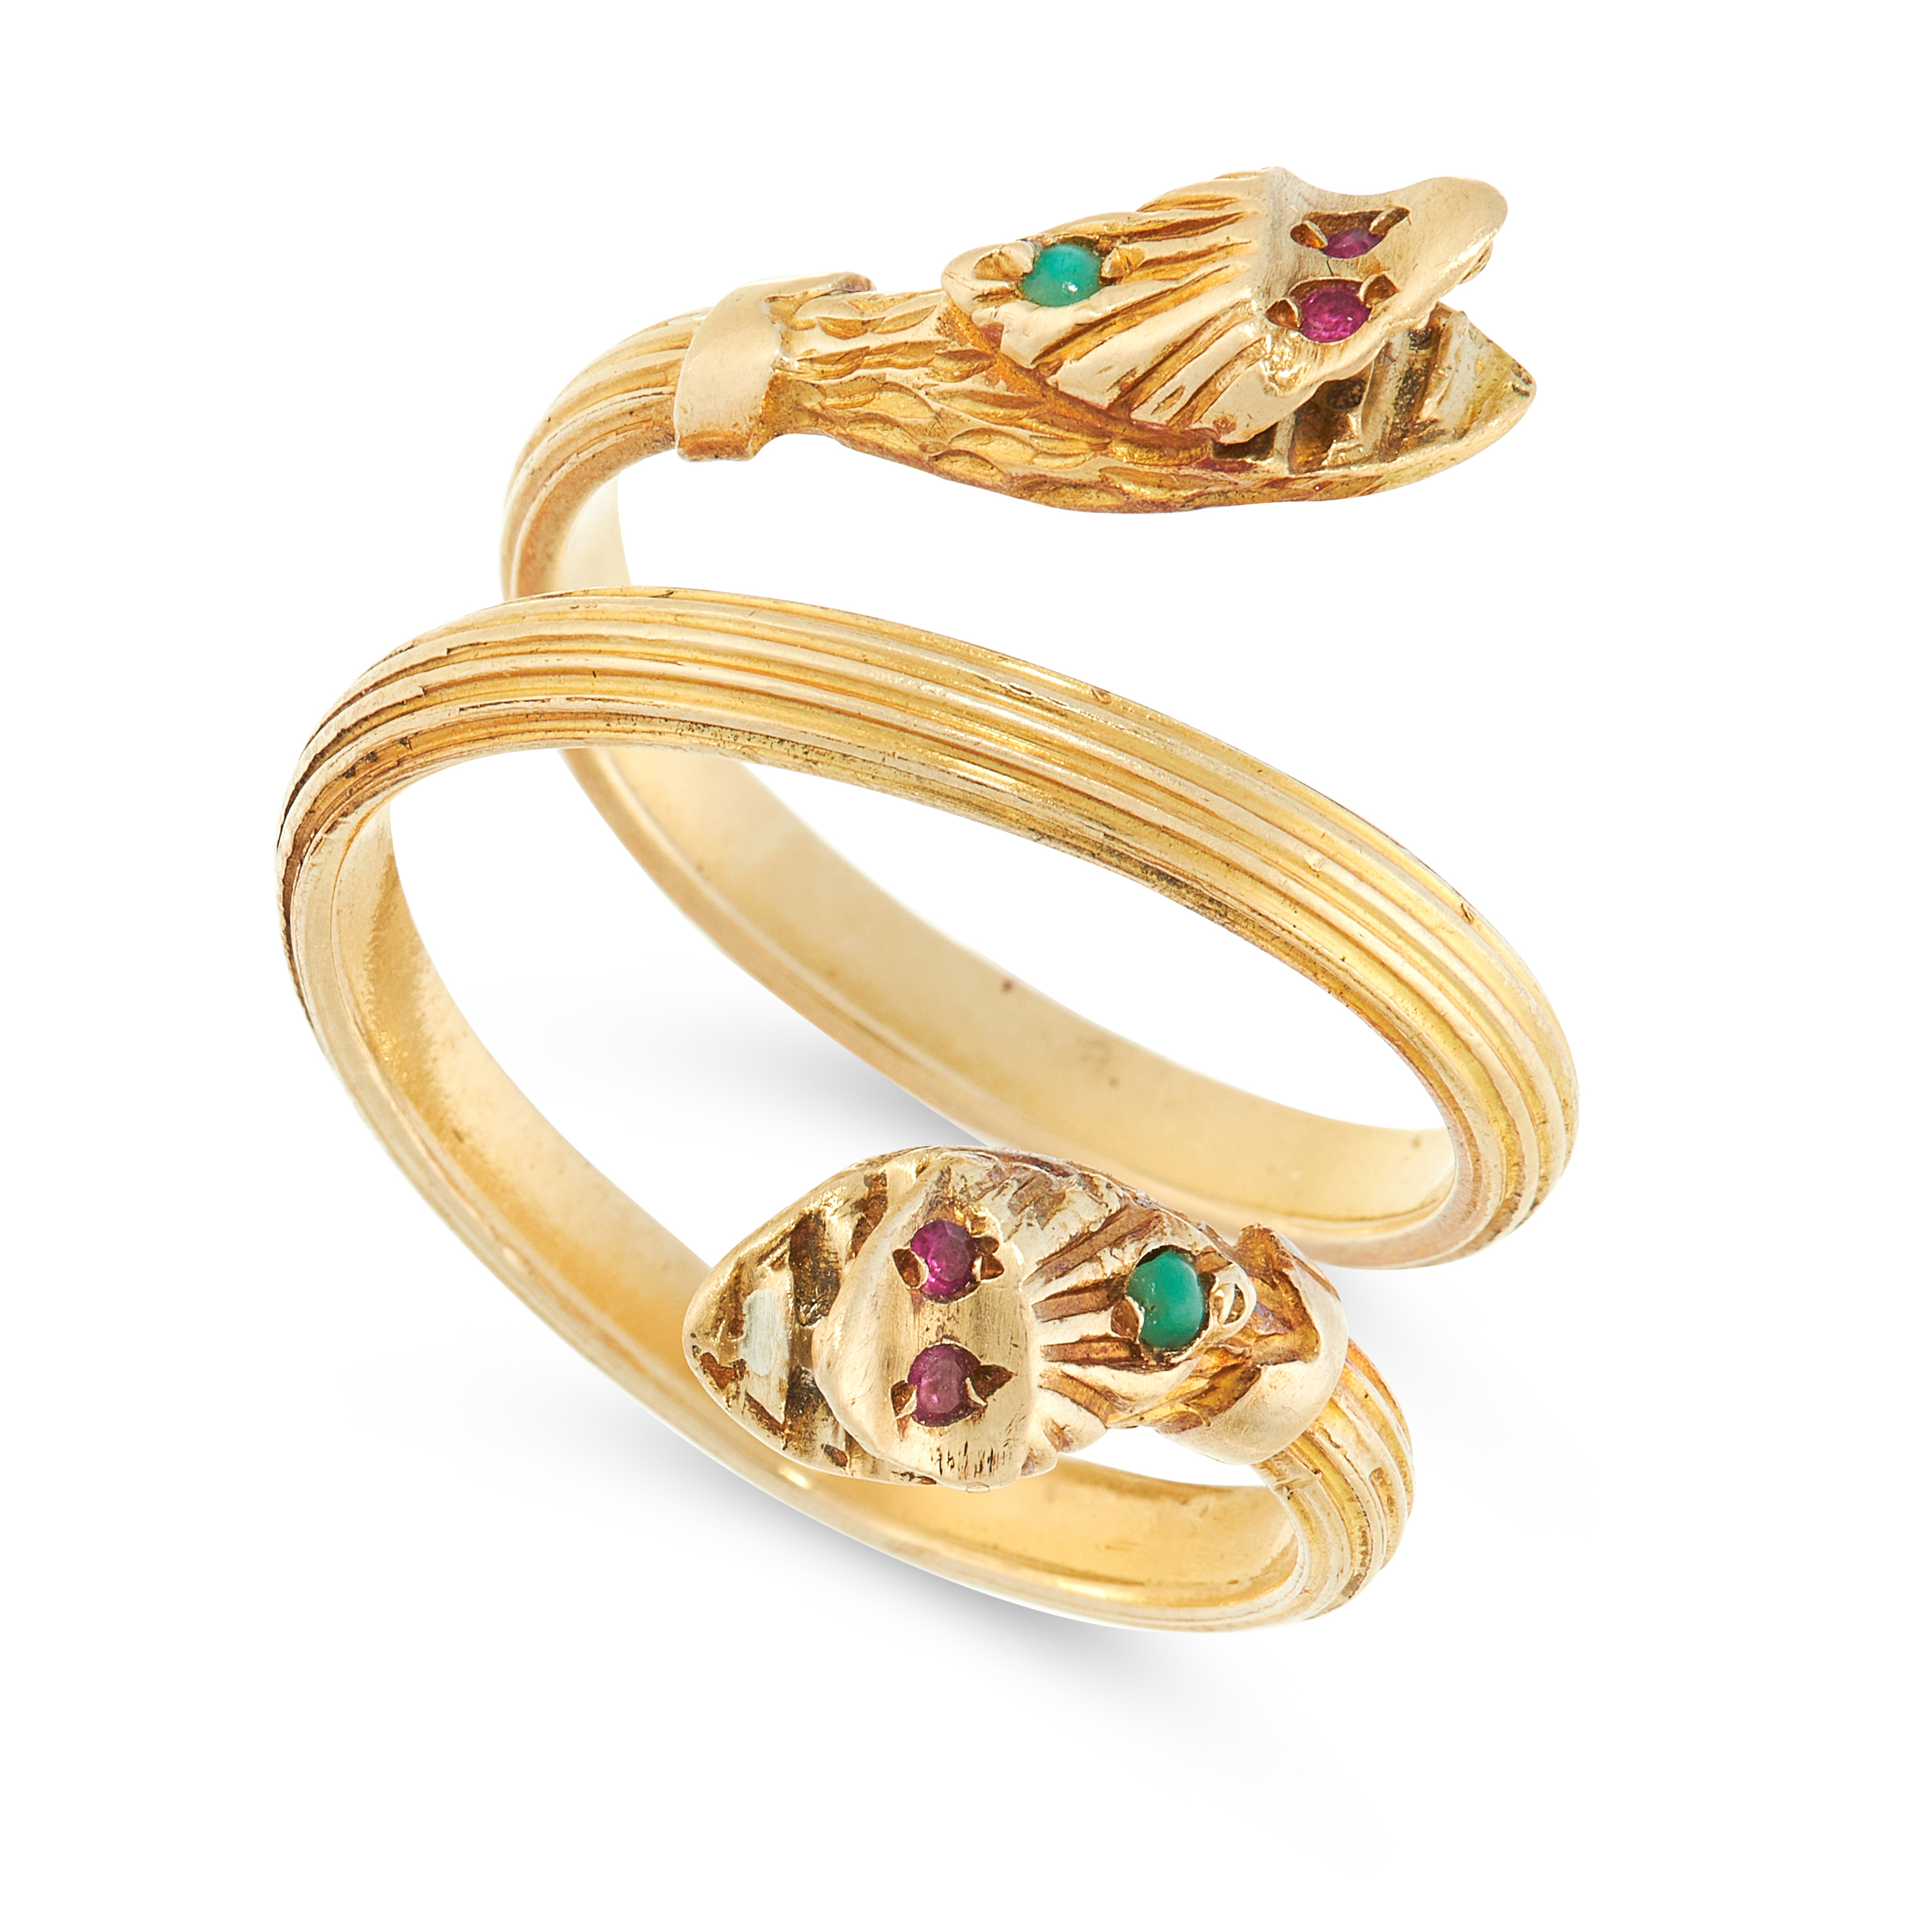 AN ANTIQUE JADE AND RUBY SNAKE RING in yellow gold, designed as two snakes coiled around on